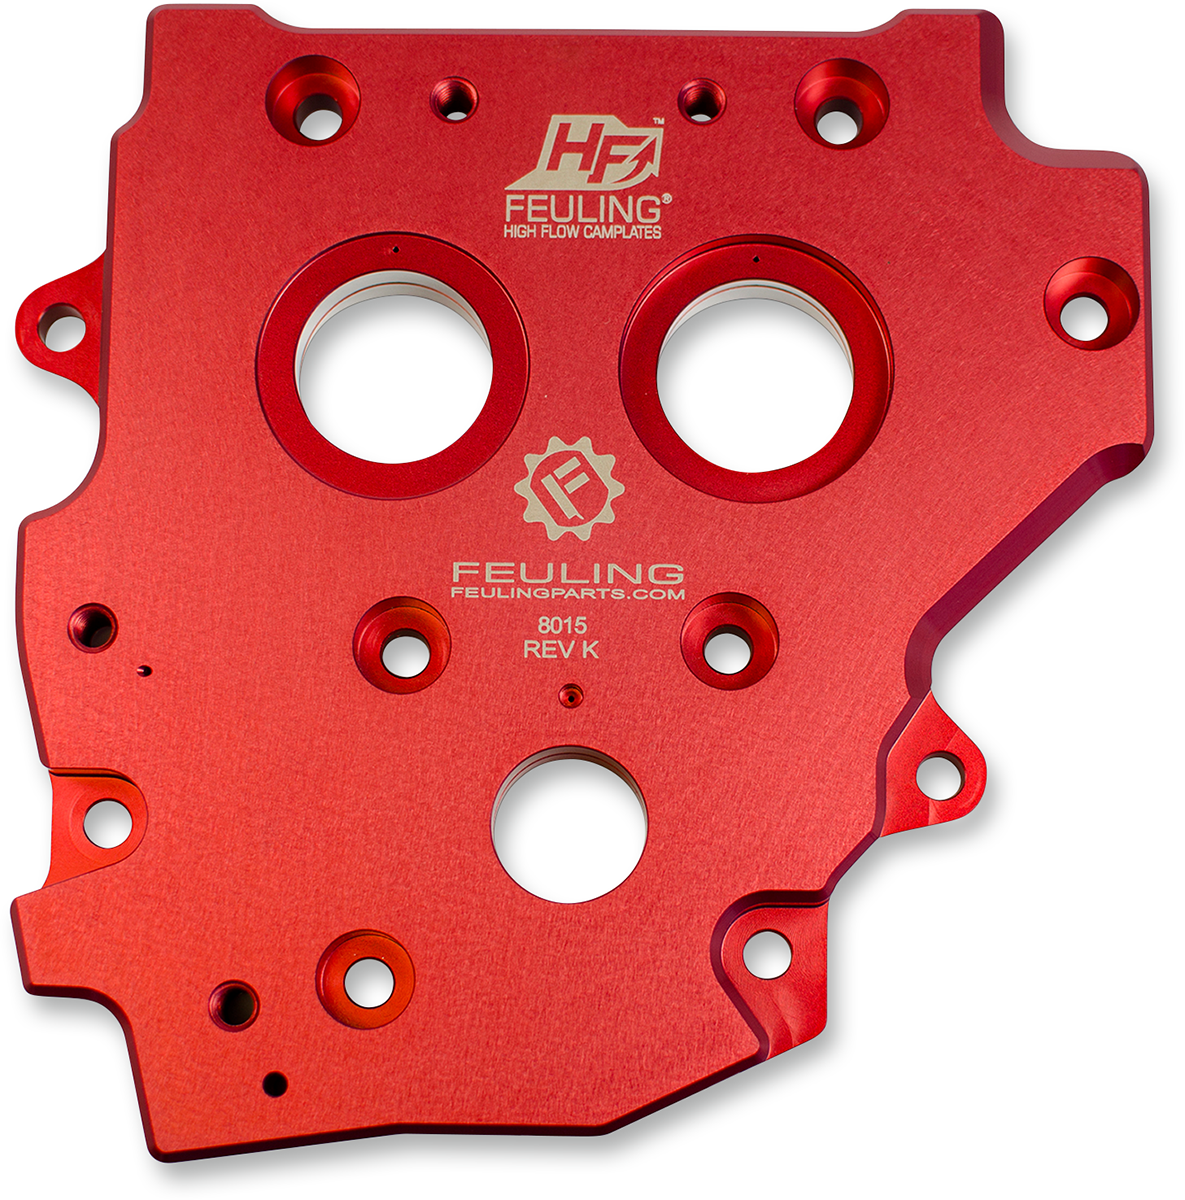 Feuling Red High Flow Cam Plate 07-17 Harley Dyna Touring Softail FXS FLHX FXSTC